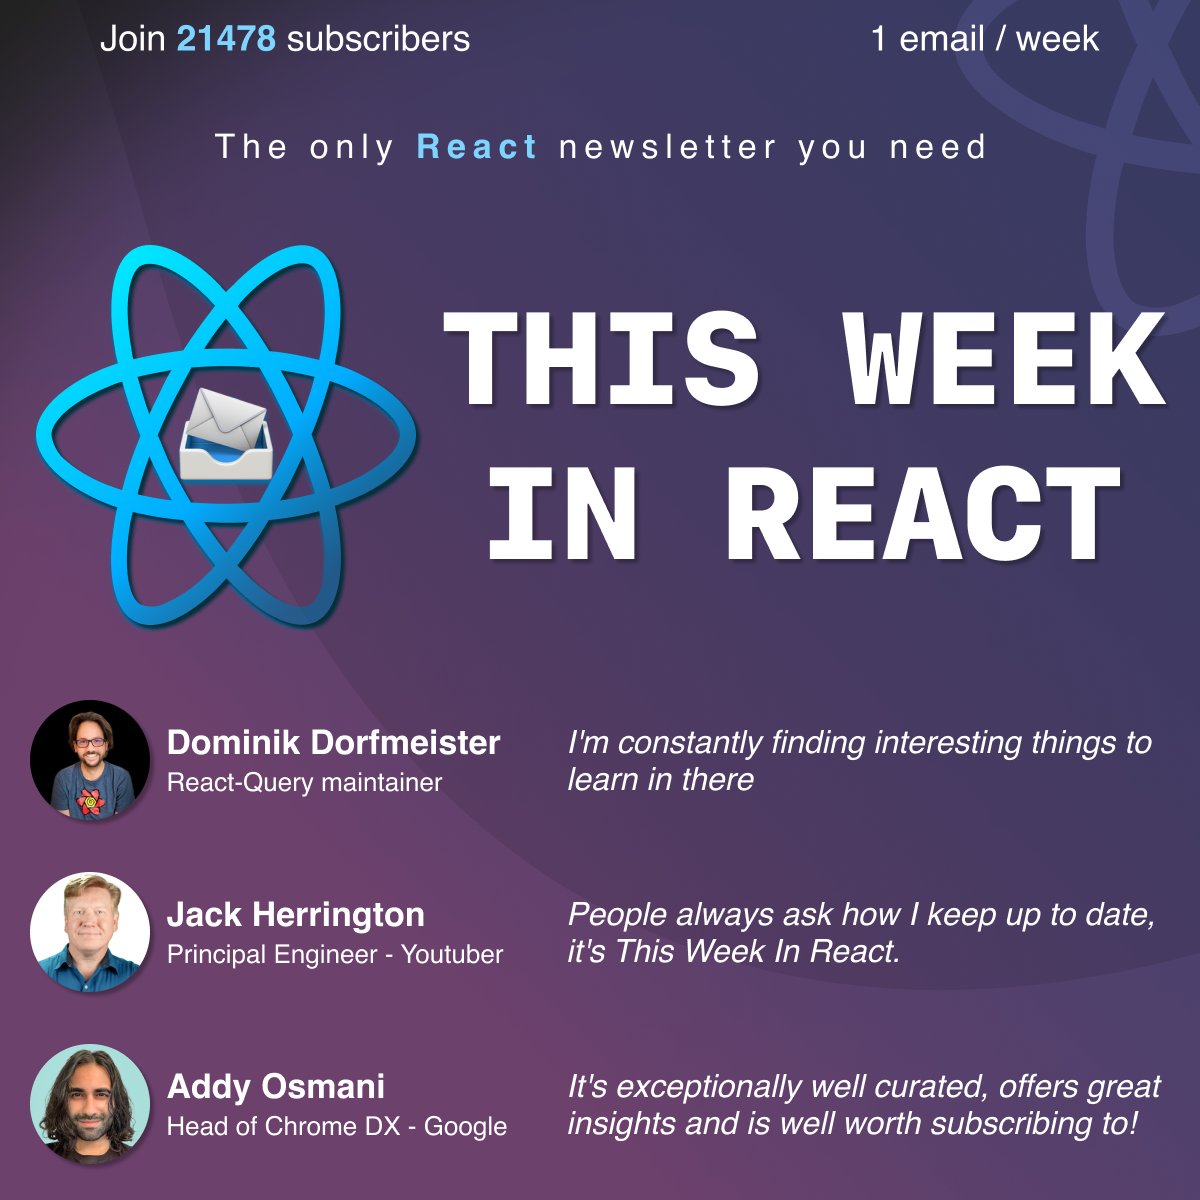 This Week In React 155 ⚛️ 👉 RSC DevTools 👉 Next.js Caching 👉 Radix Themes 👉 Graph Gallery 👉 Astro Persist 👉 Apollo Suspense 👉 ESM + Redux 👉 Remix DevTools 👉 StyleX? 📱 👉 Expo Party 👉 Apple Settings 👉 Stable Diffusion 👉 Reanimated ... more by ✉️ Details 👇